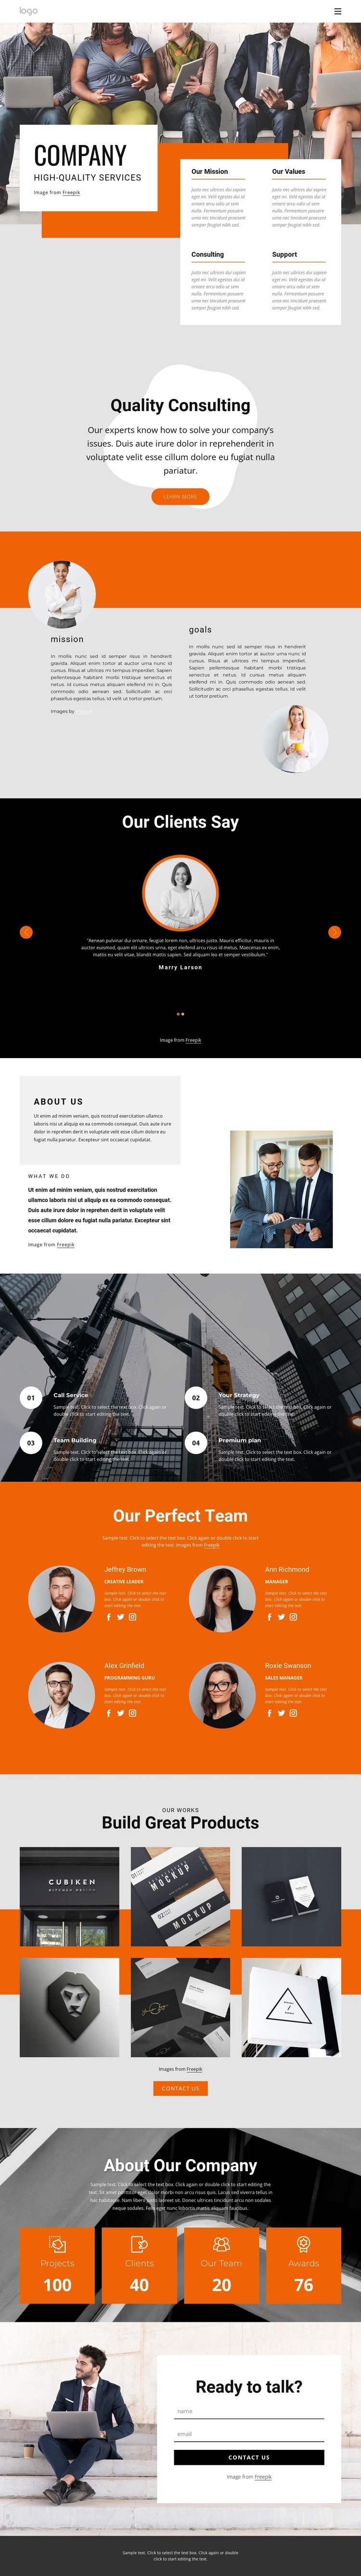 Hight quality consulting firm Html Code Example